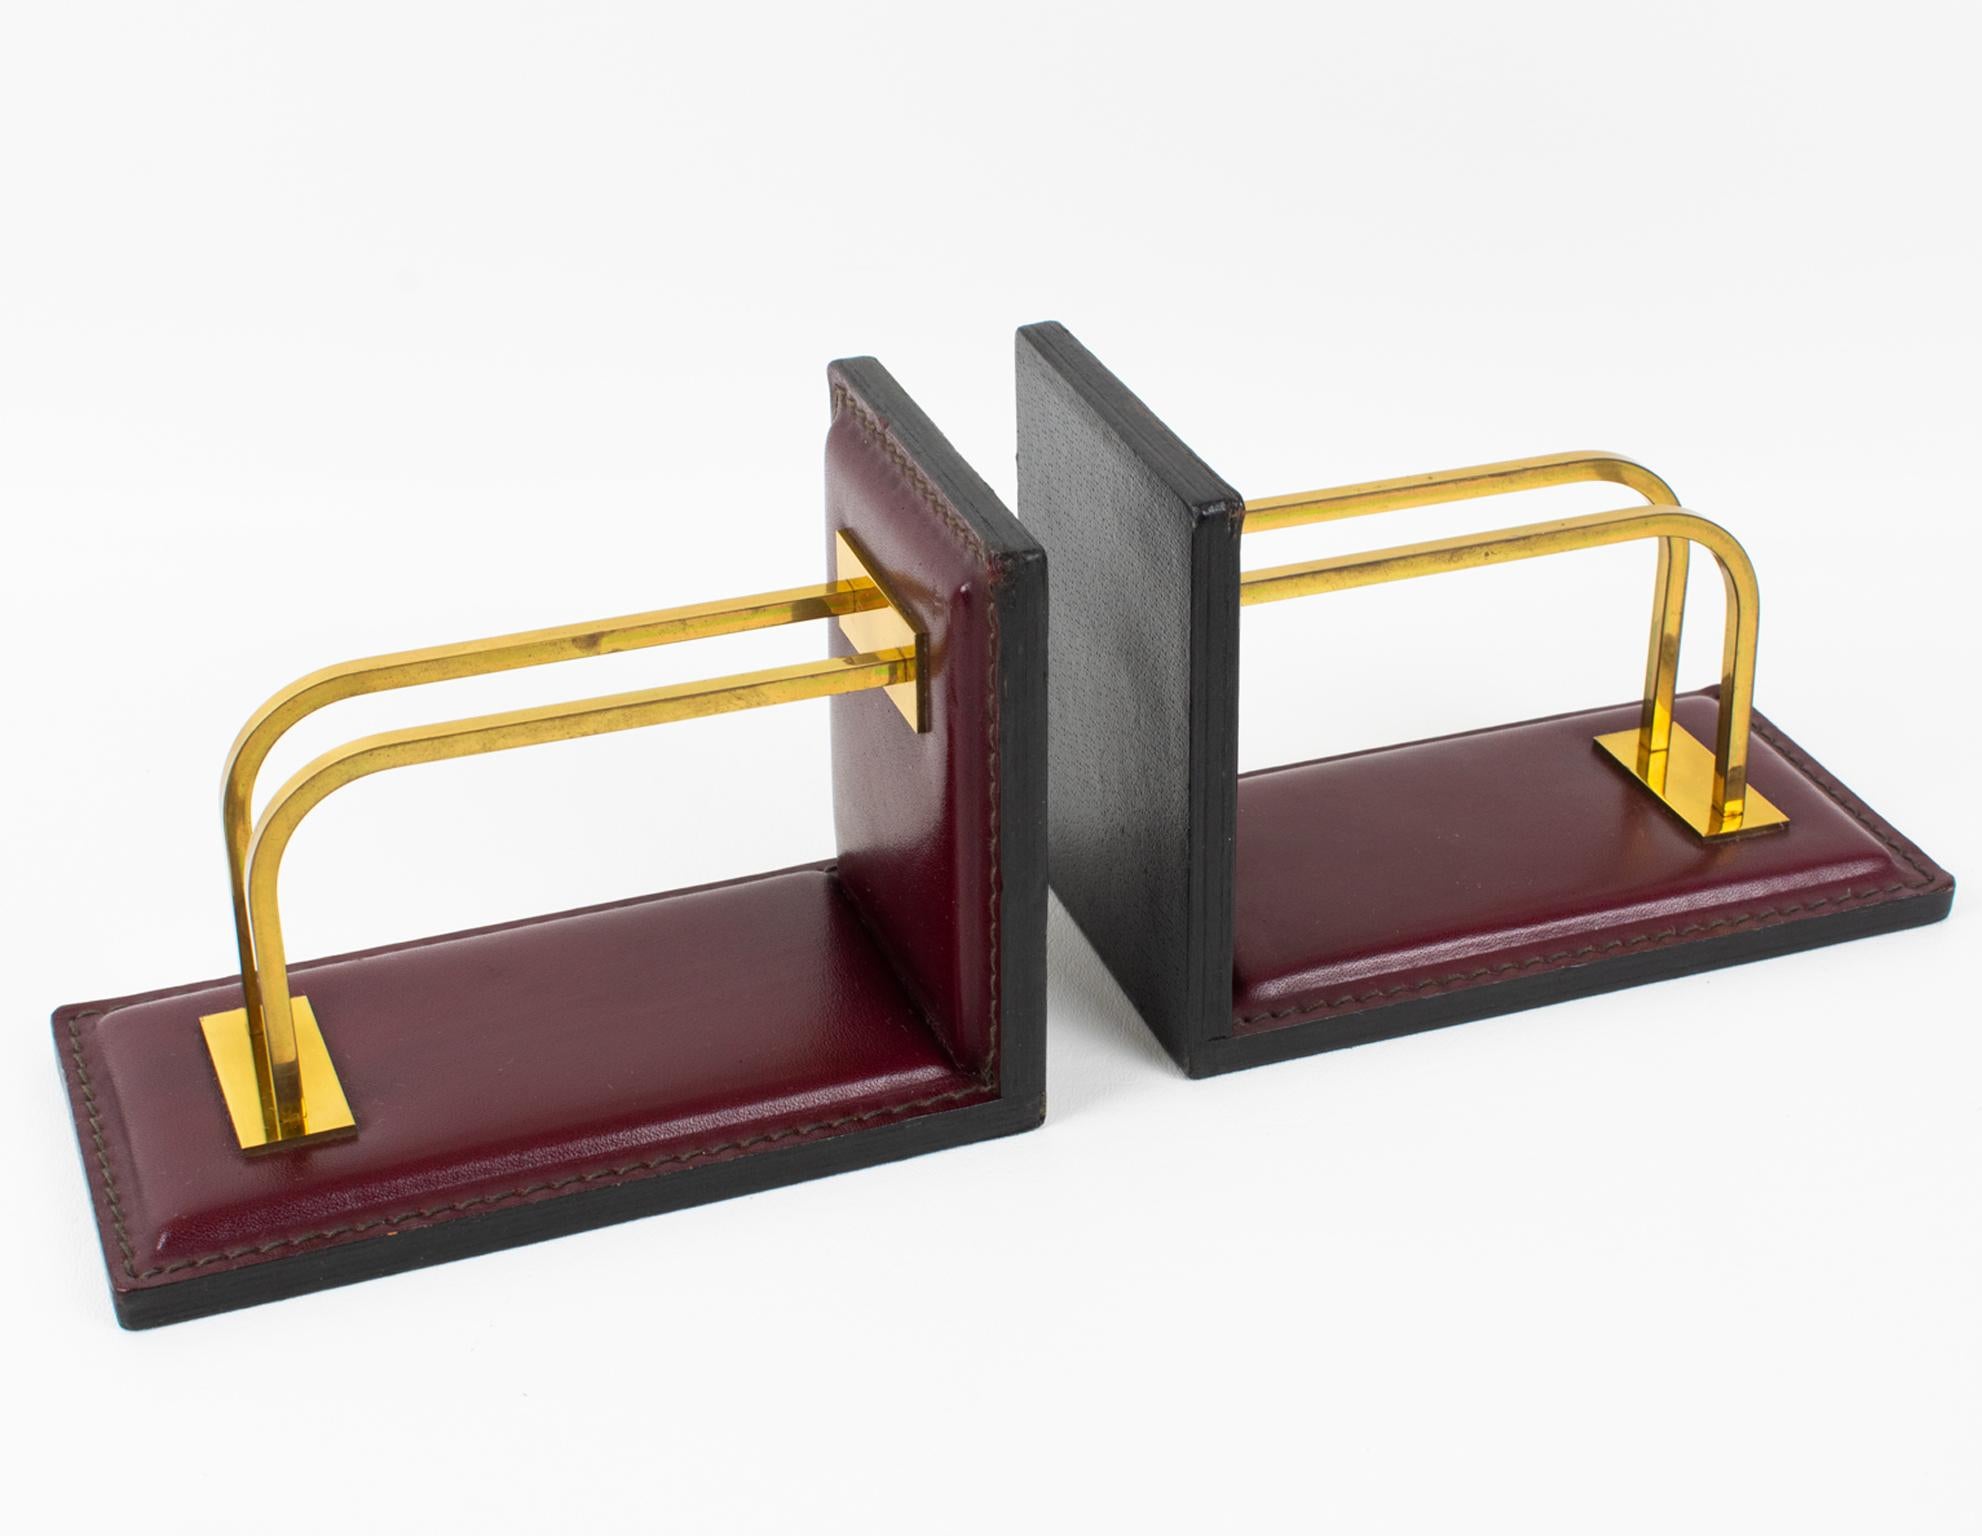 These lovely 1950s leather bookends were designed by French designer Jacques Adnet (1901-1984) and probably manufactured by ILG in Belgium. 